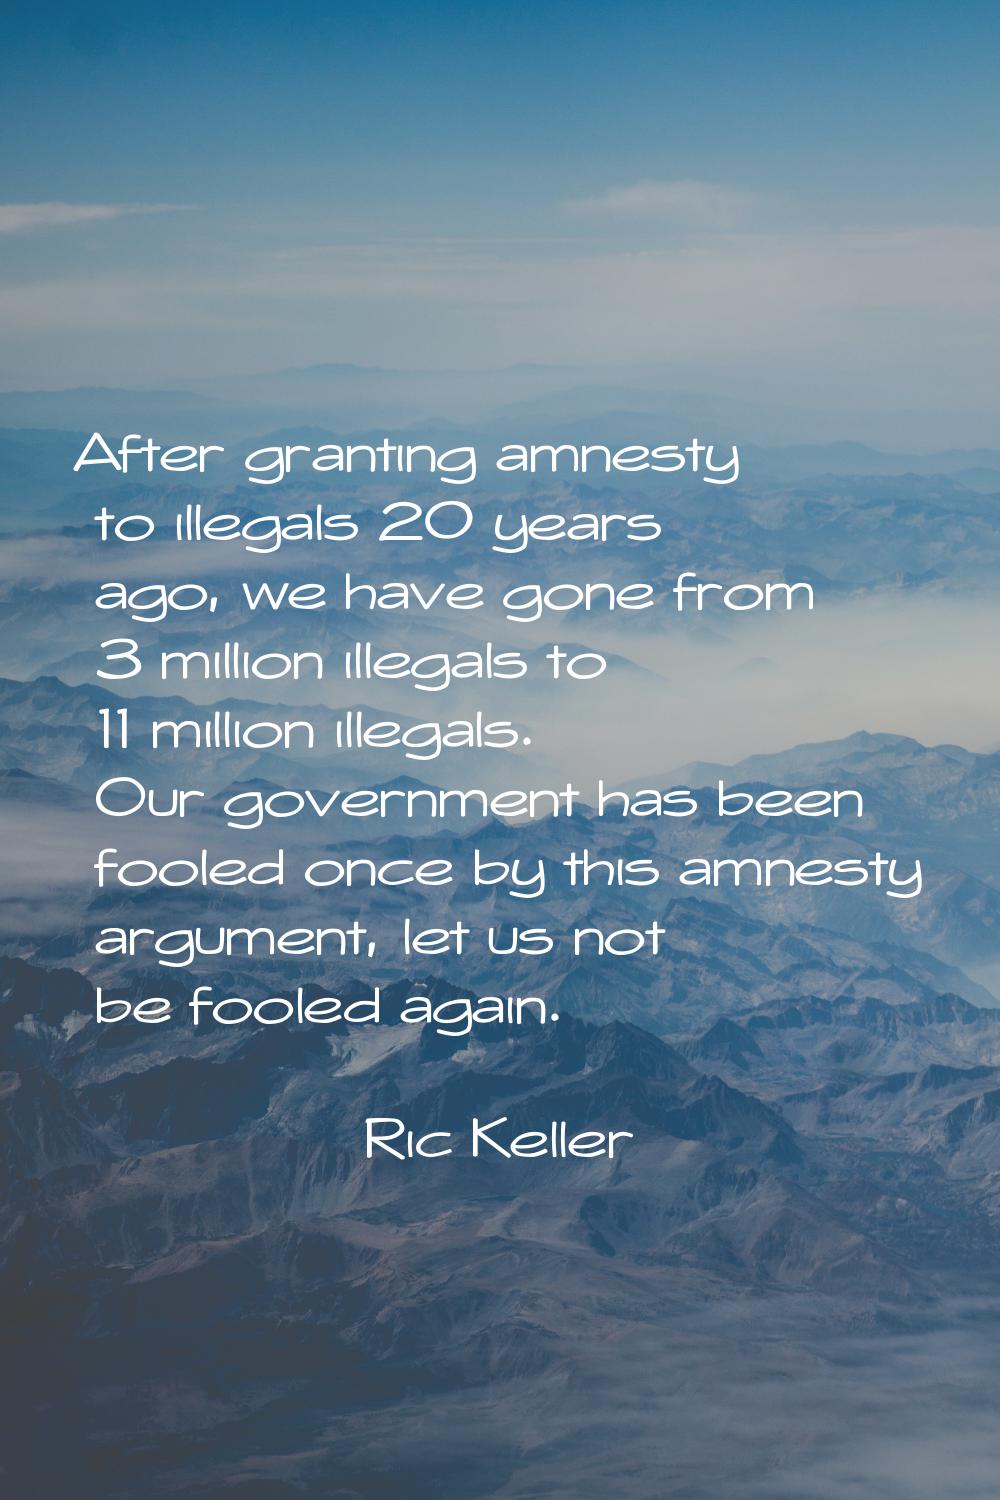 After granting amnesty to illegals 20 years ago, we have gone from 3 million illegals to 11 million